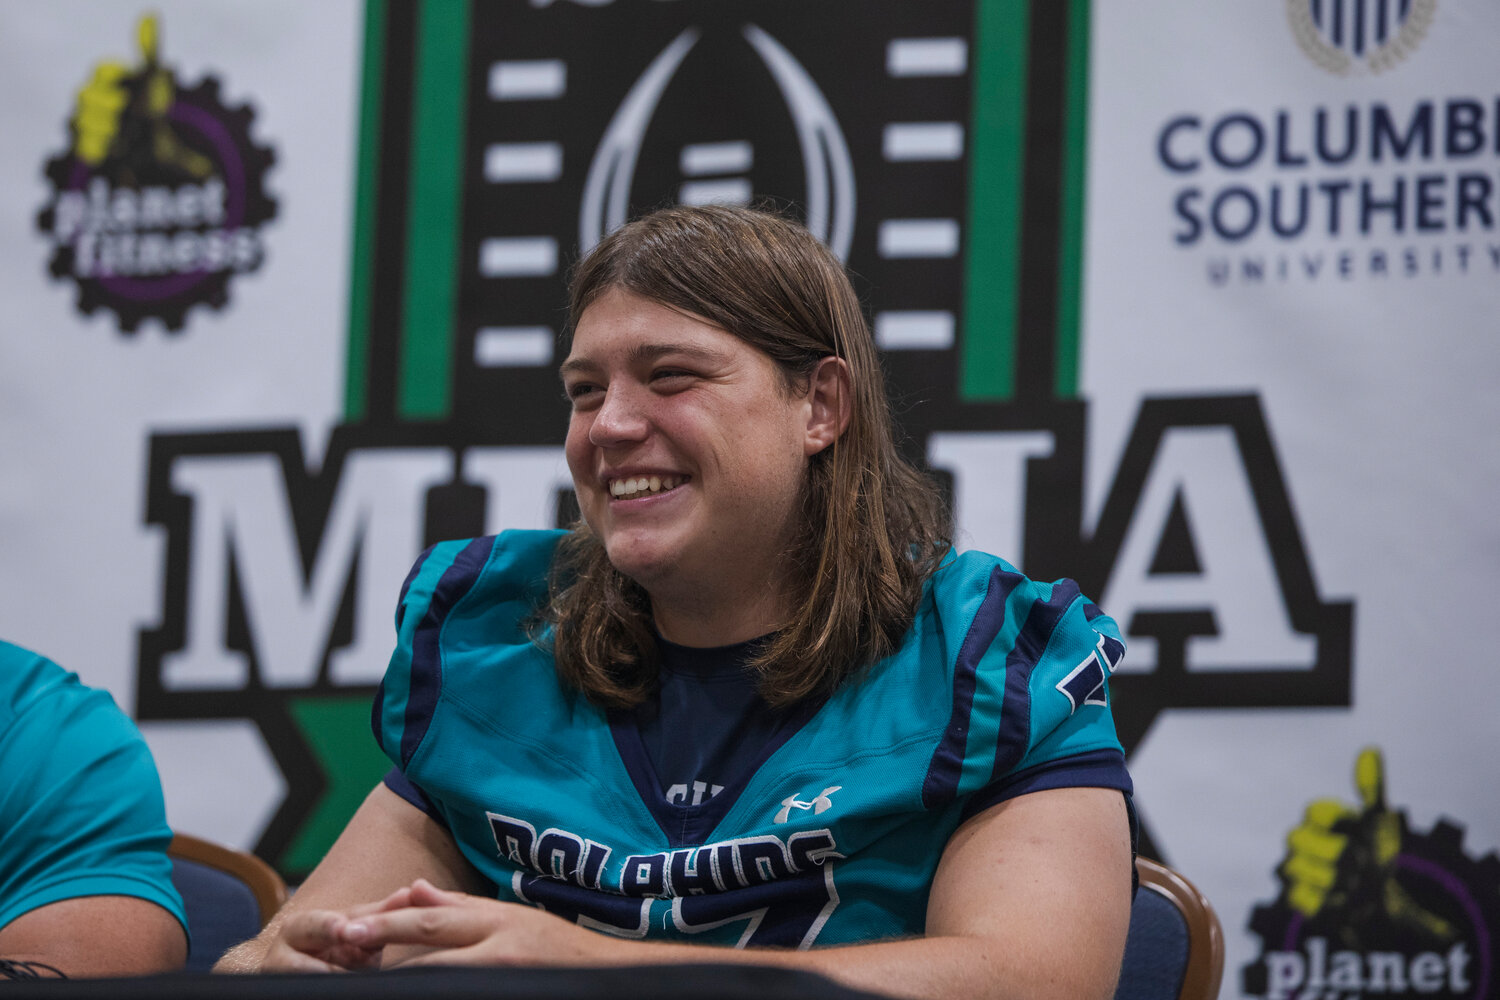 Chase Jennings represented the Gulf Shores Dolphins on Thursday, July 27, at the second-annual Gulf Coast Media Day where local teams previewed their seasons. Jennings is part of a veteran group of offensive linemen that will look to set the tone in the trenches.